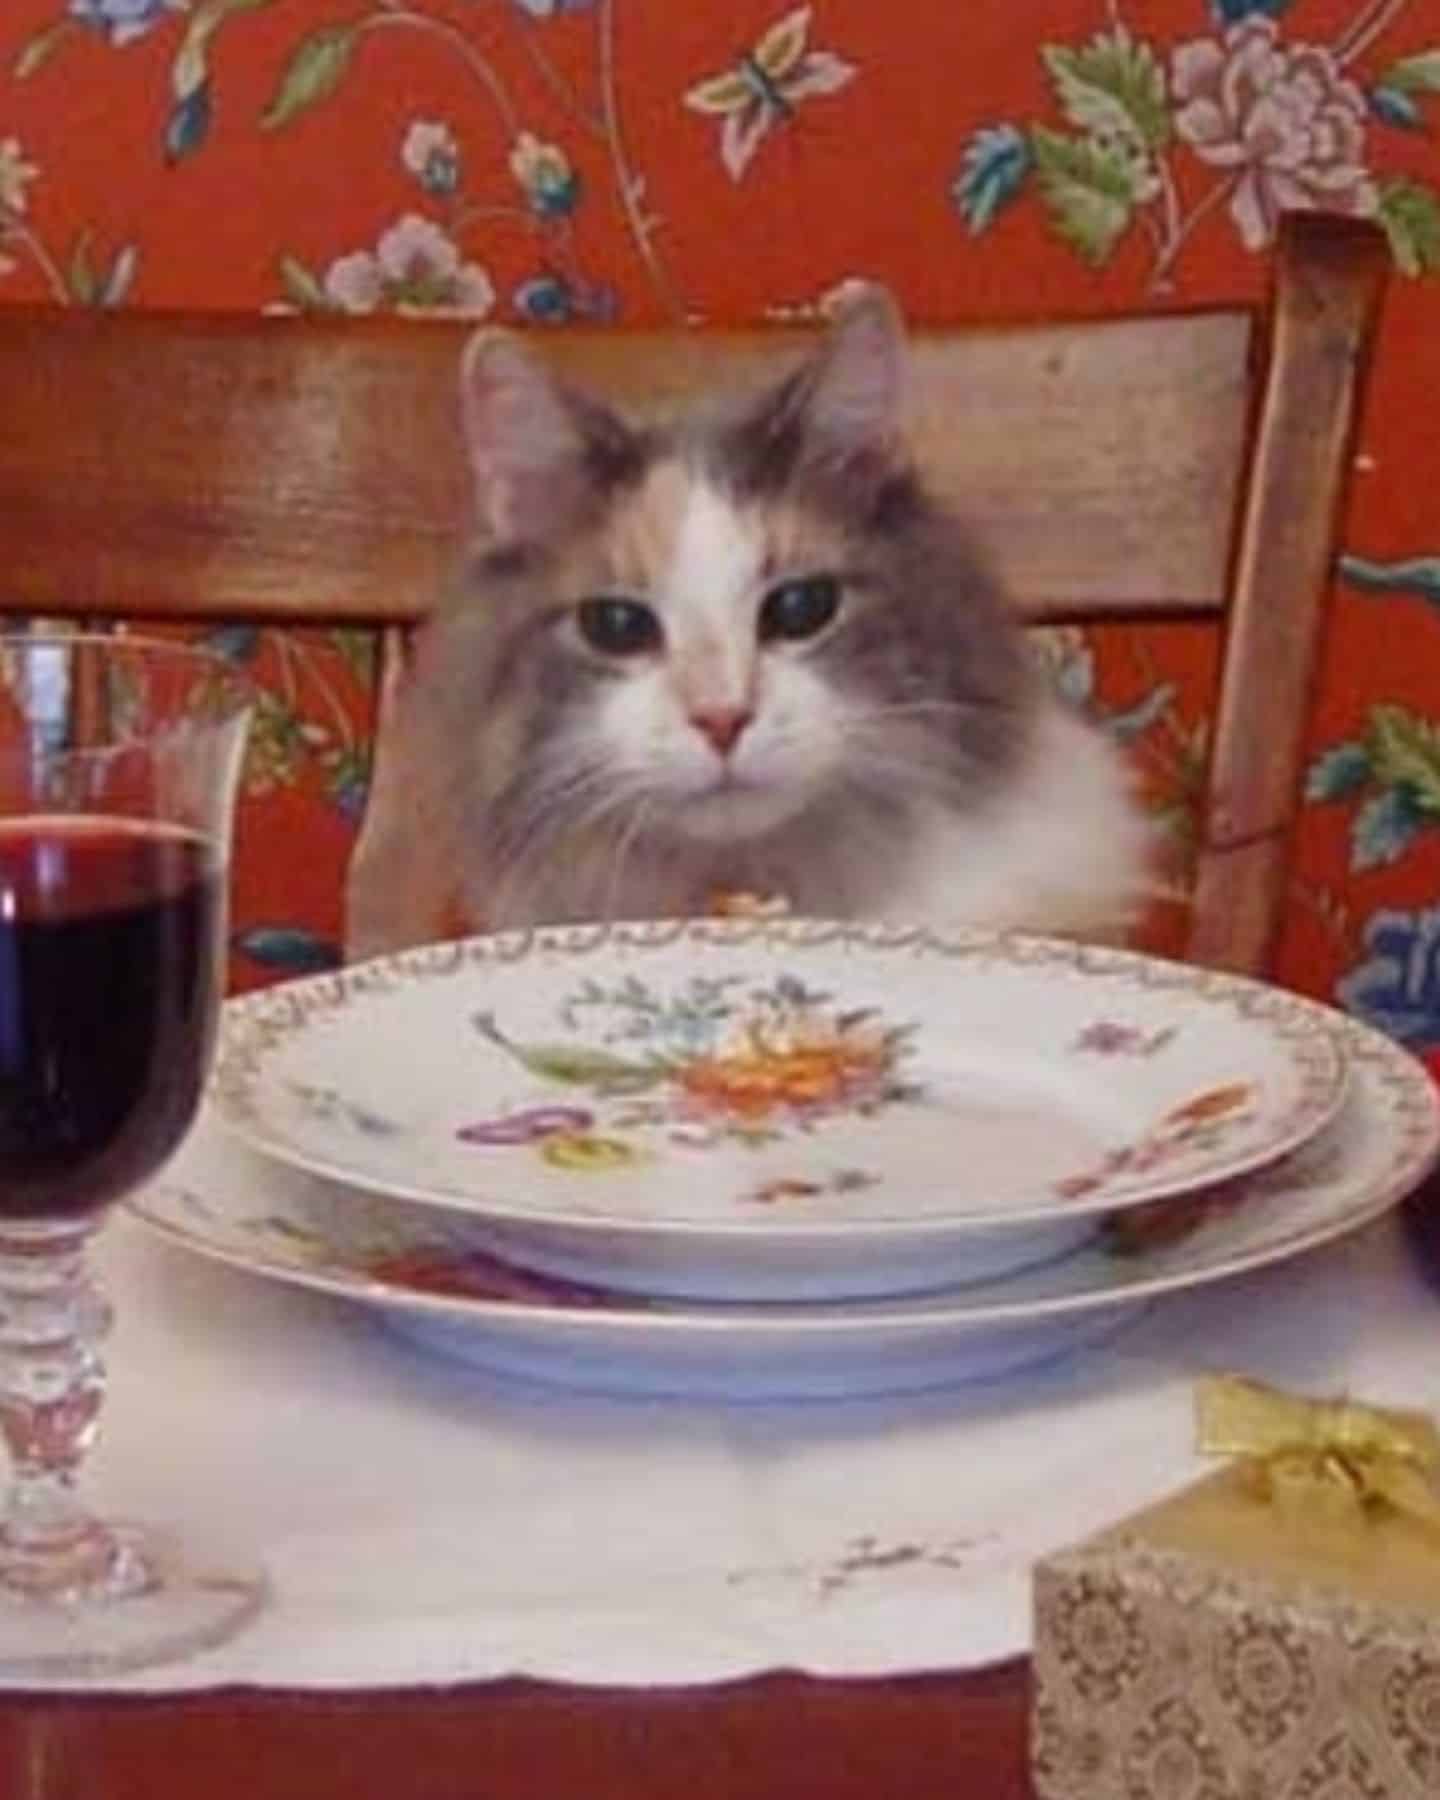 the cat is sitting at the table